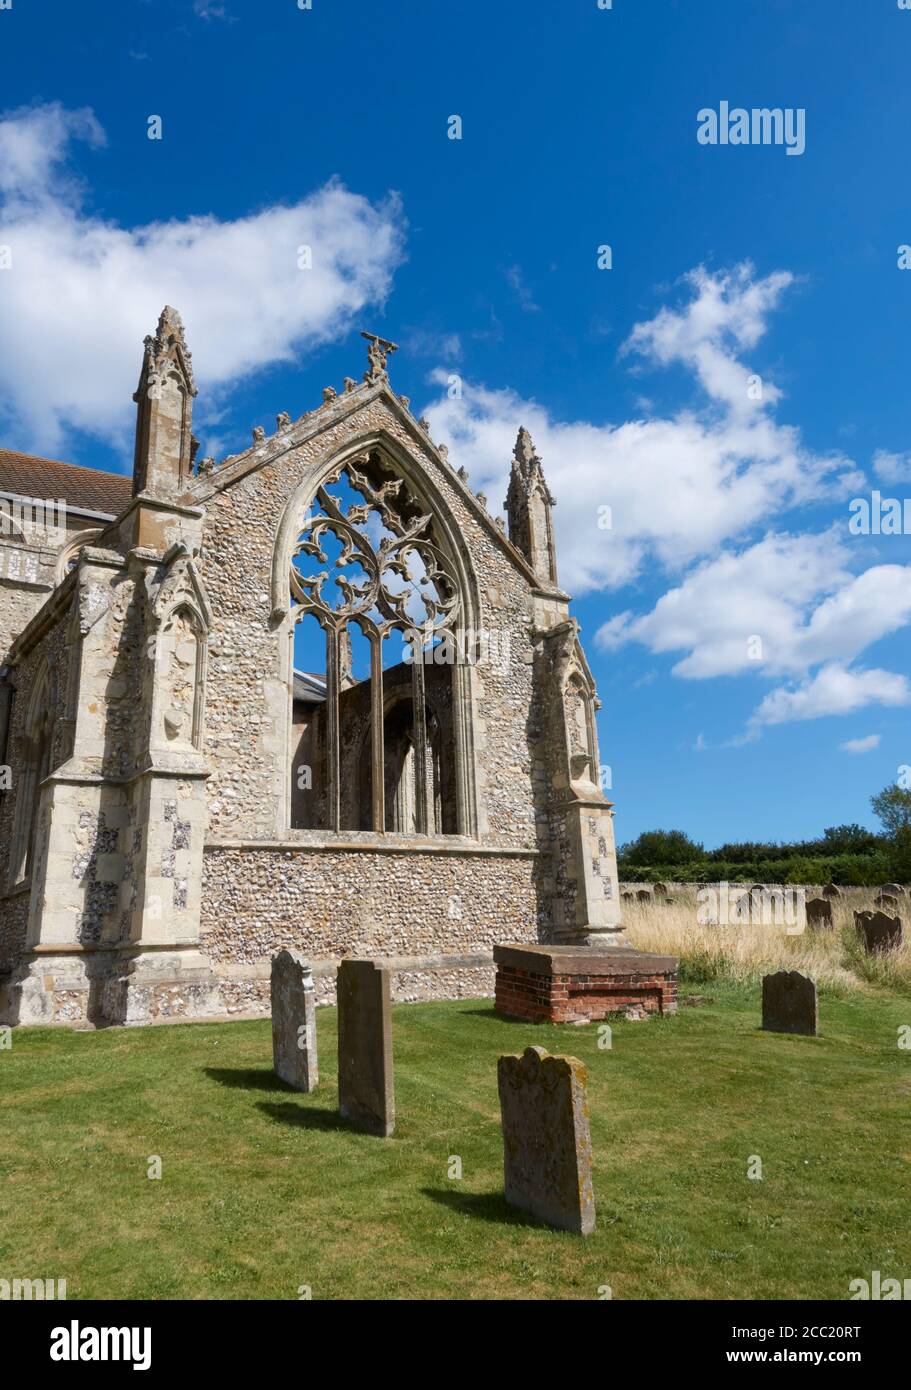 The derelict south transept of Saint Margaret's Church, Cley next the Sea, Norfolk, UK. Stock Photo